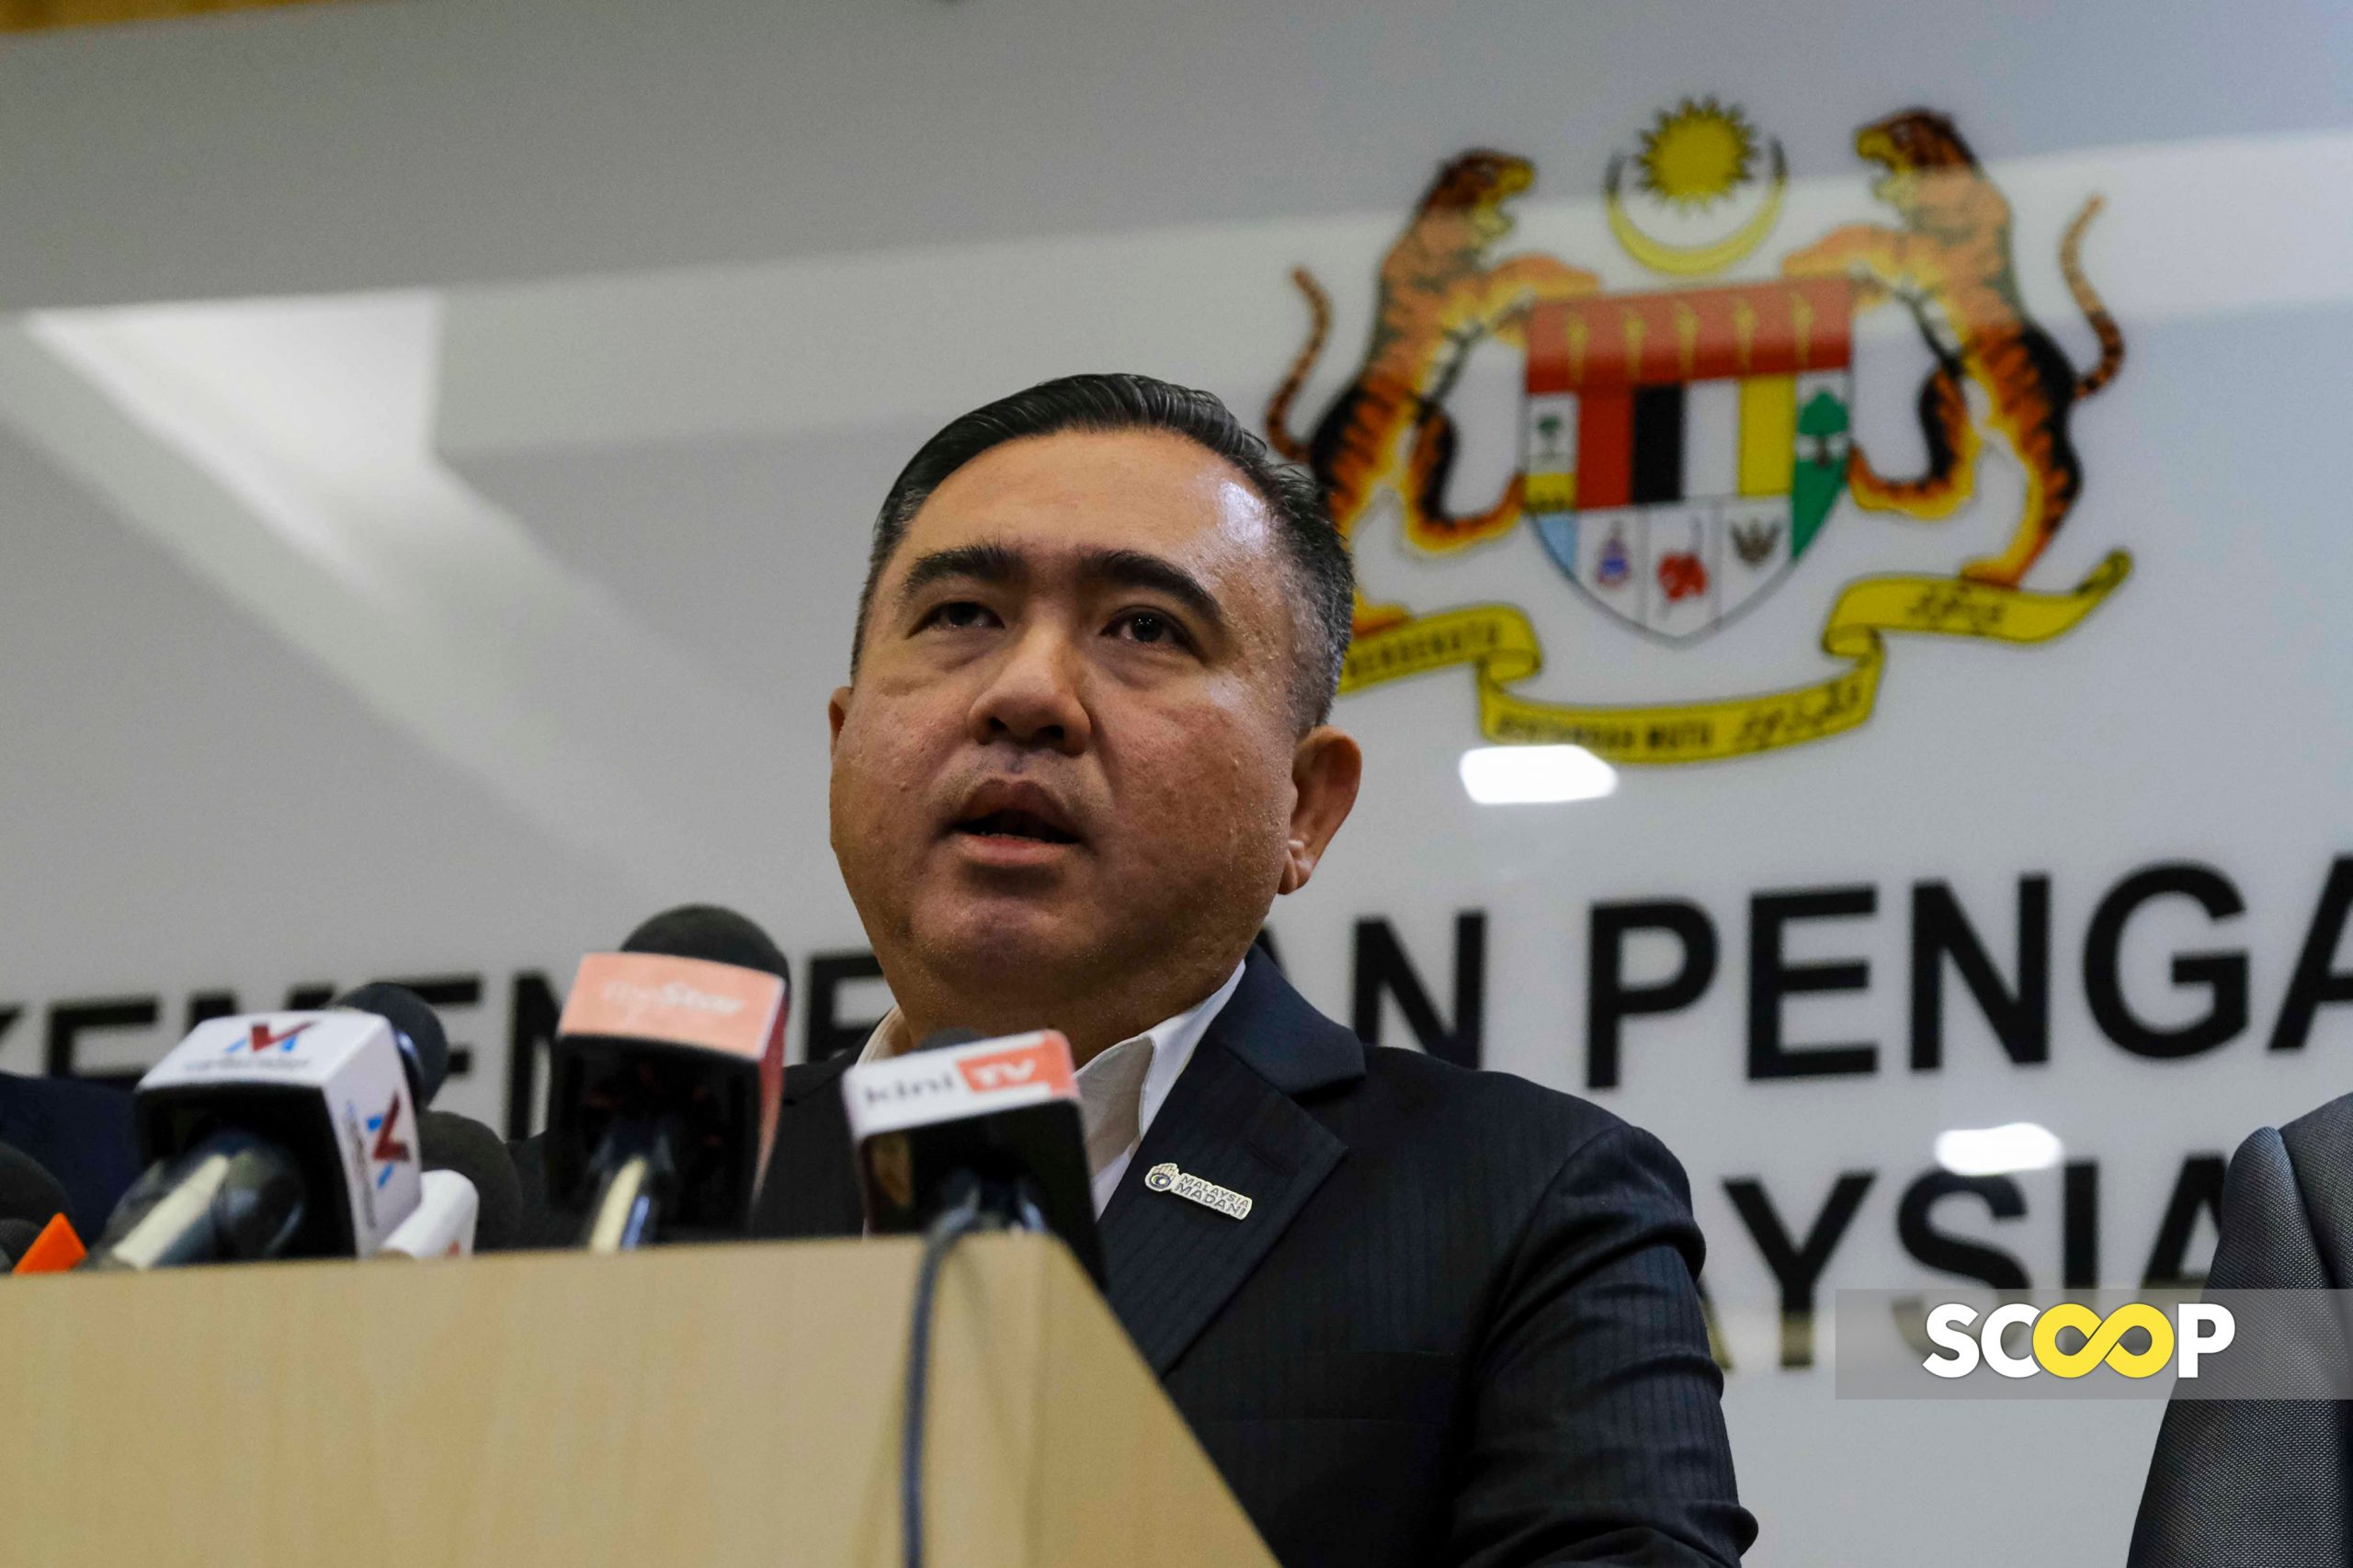 Physical road tax problem: miscommunication, stock issues among factors, says Loke